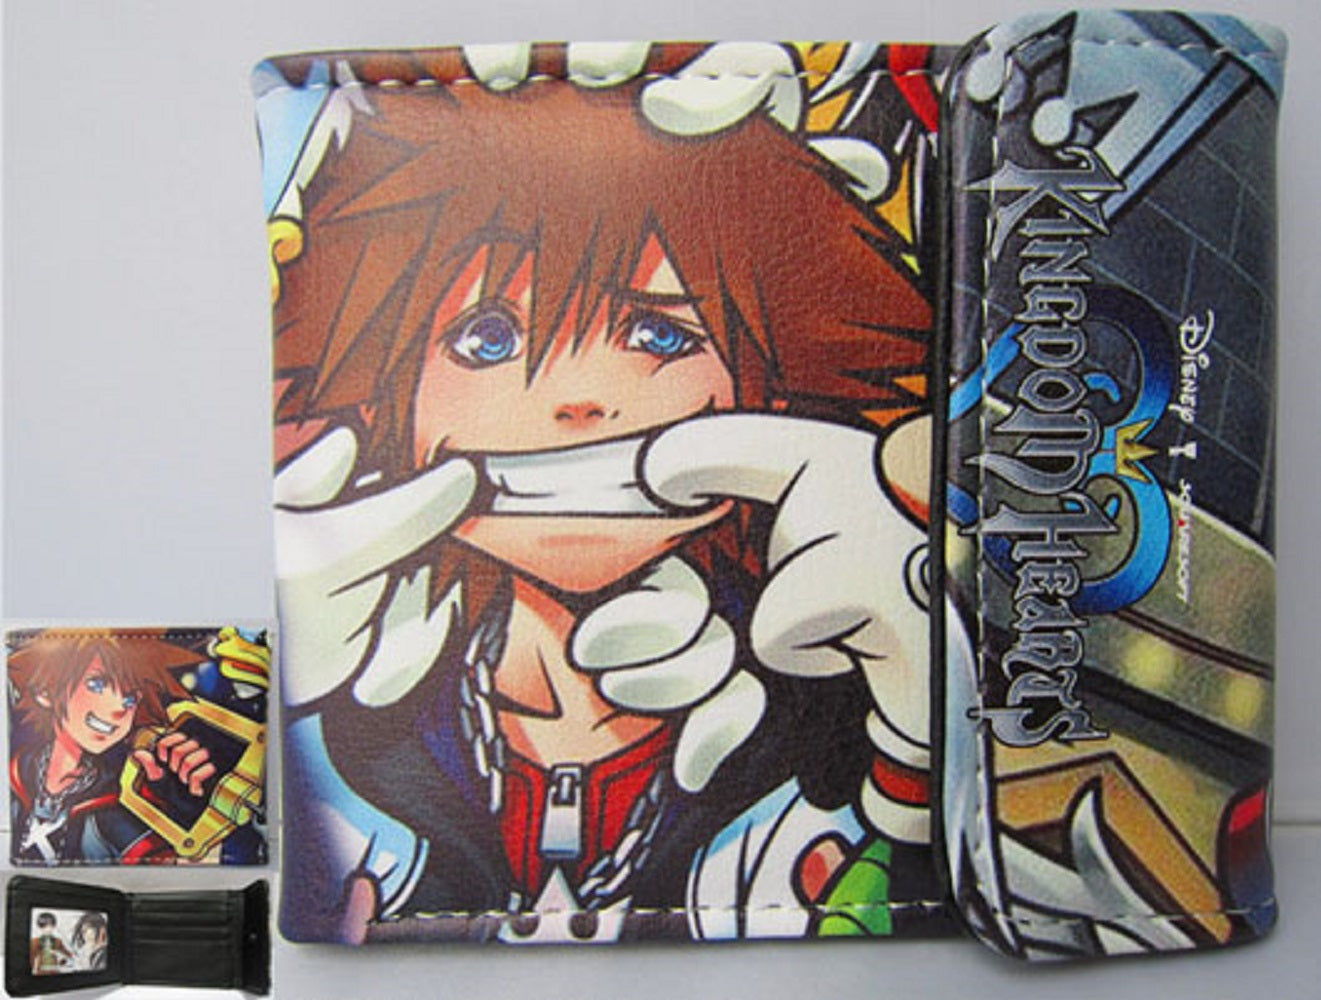 Kingdom Hearts Sora Funny Face Wallet - Super Anime Store FREE SHIPPING FAST SHIPPING USA